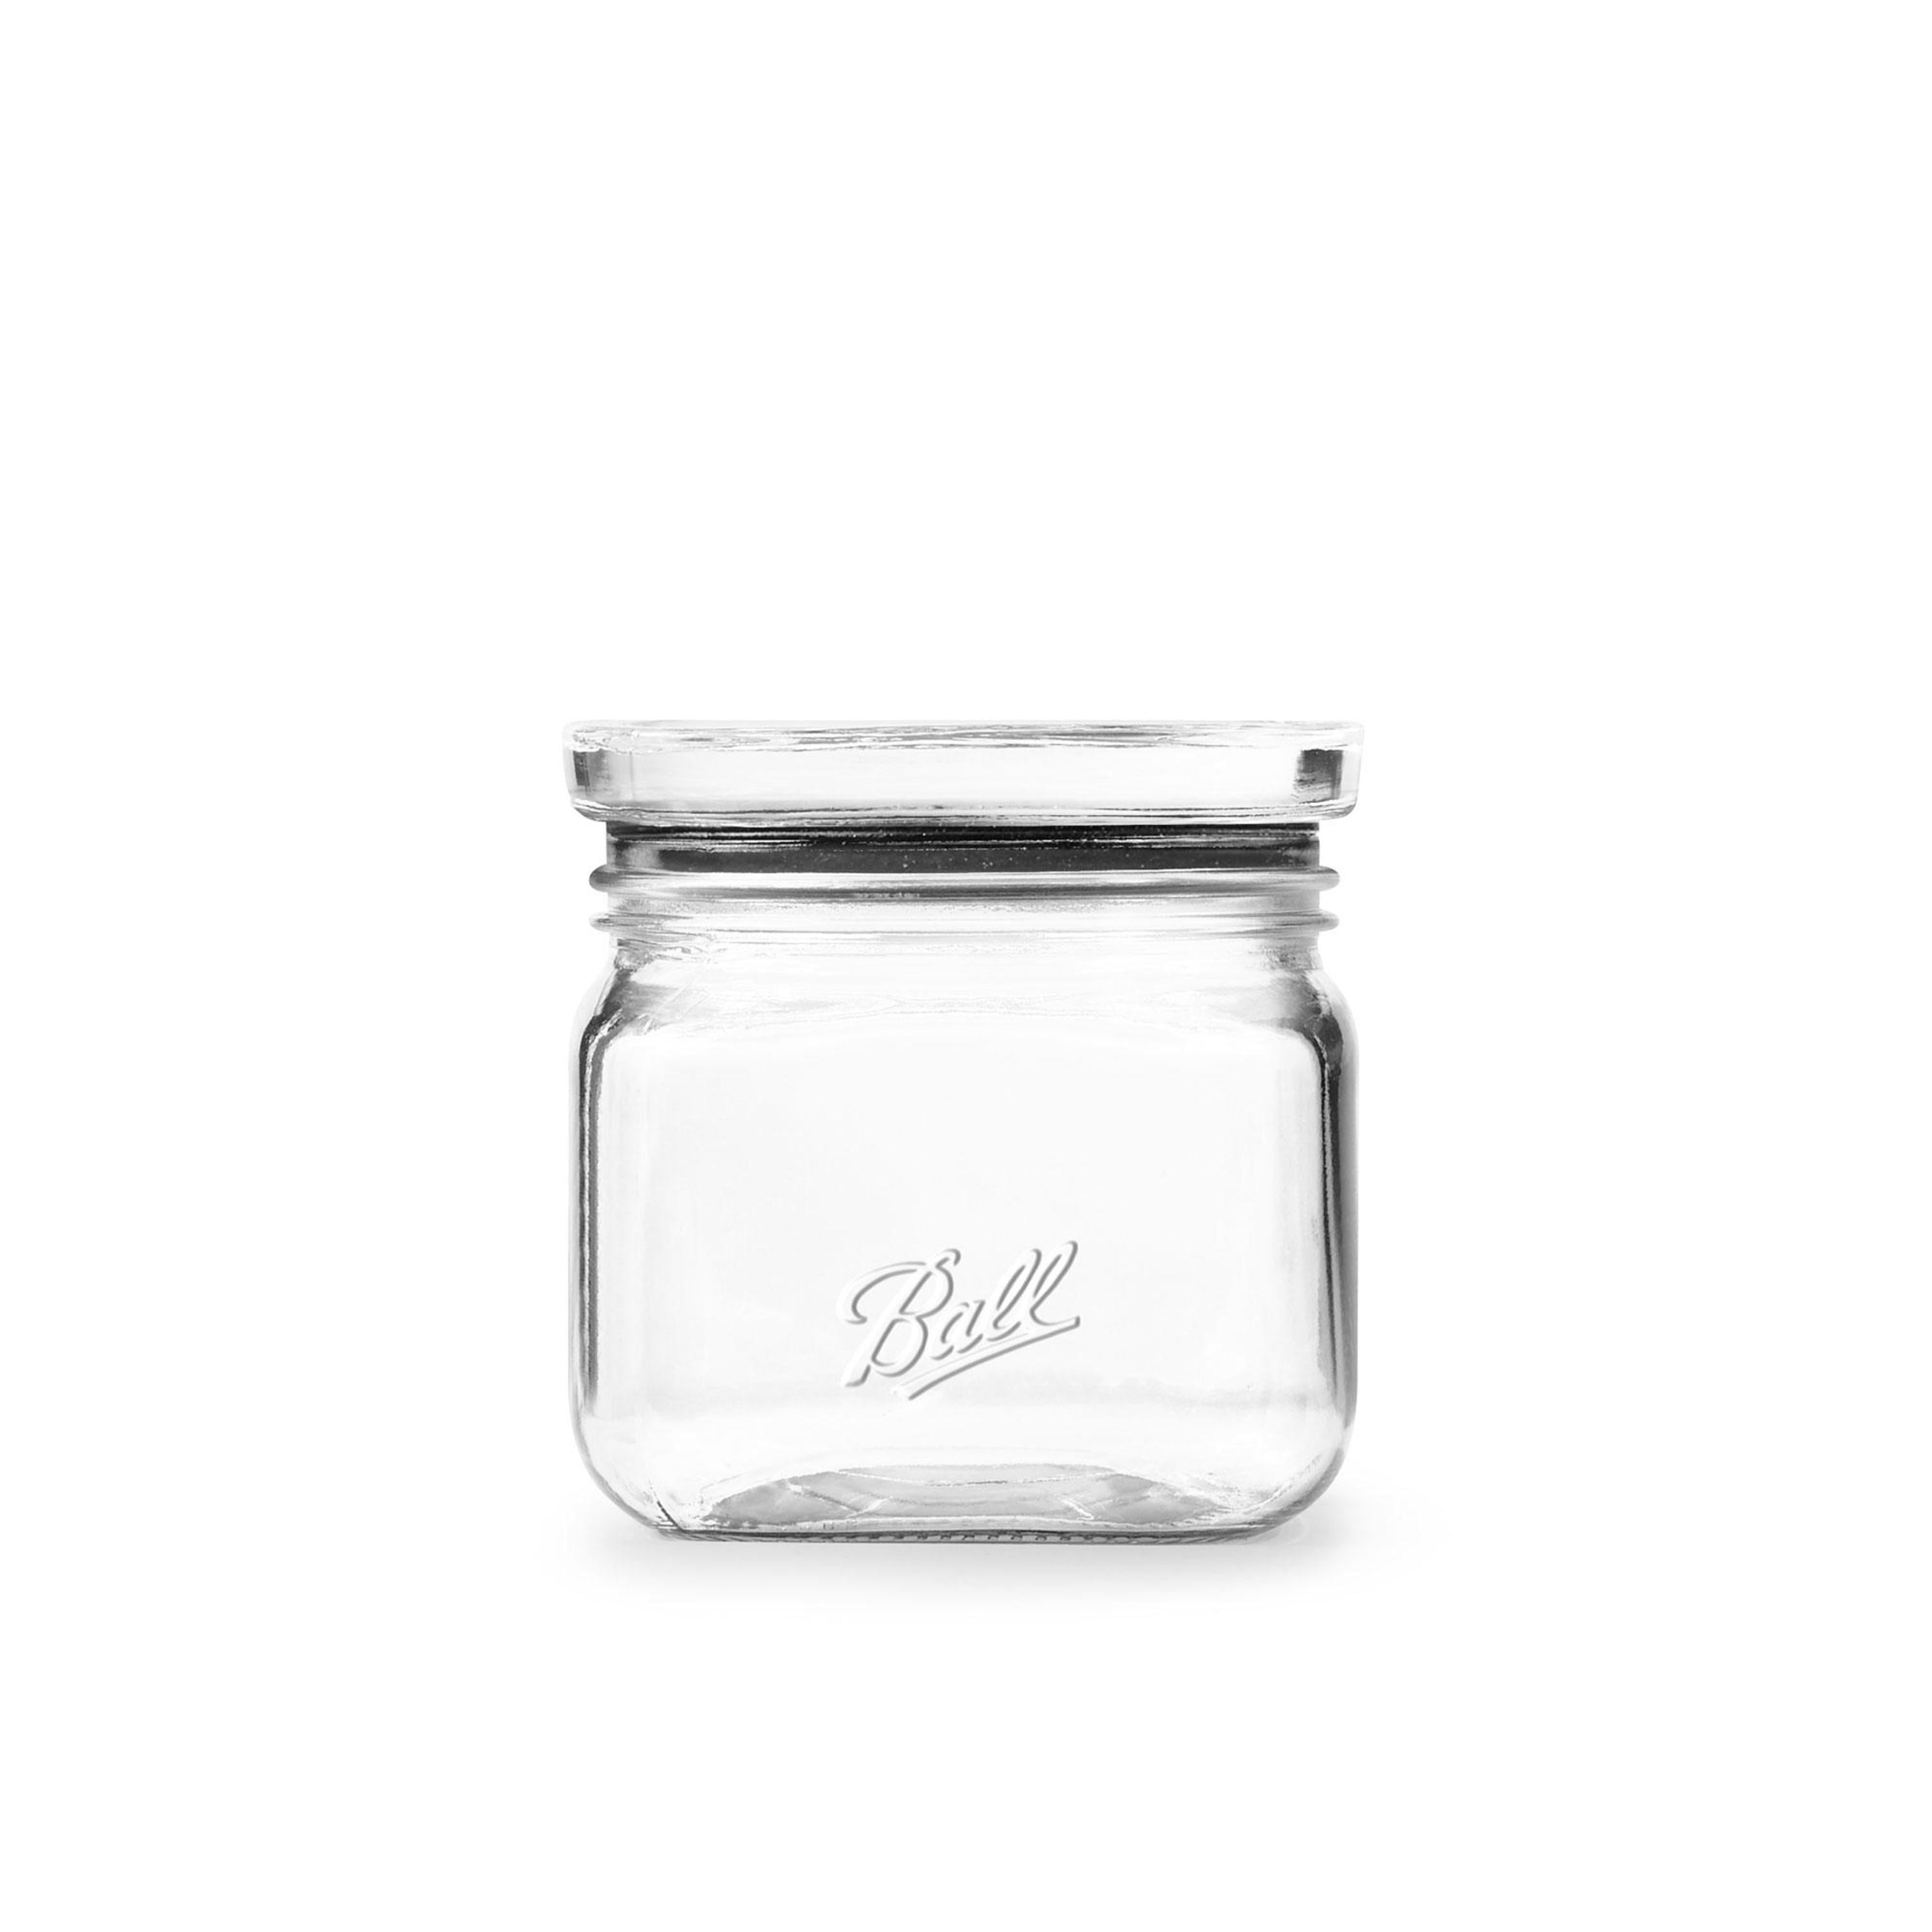 Encheng 16 oz Glass Jars With Airtight Lids And Leak Proof Rubber  Gasket,Wide Mouth Mason Jars With Hinged Lids For Kitchen,Glass Storage  Containers 6